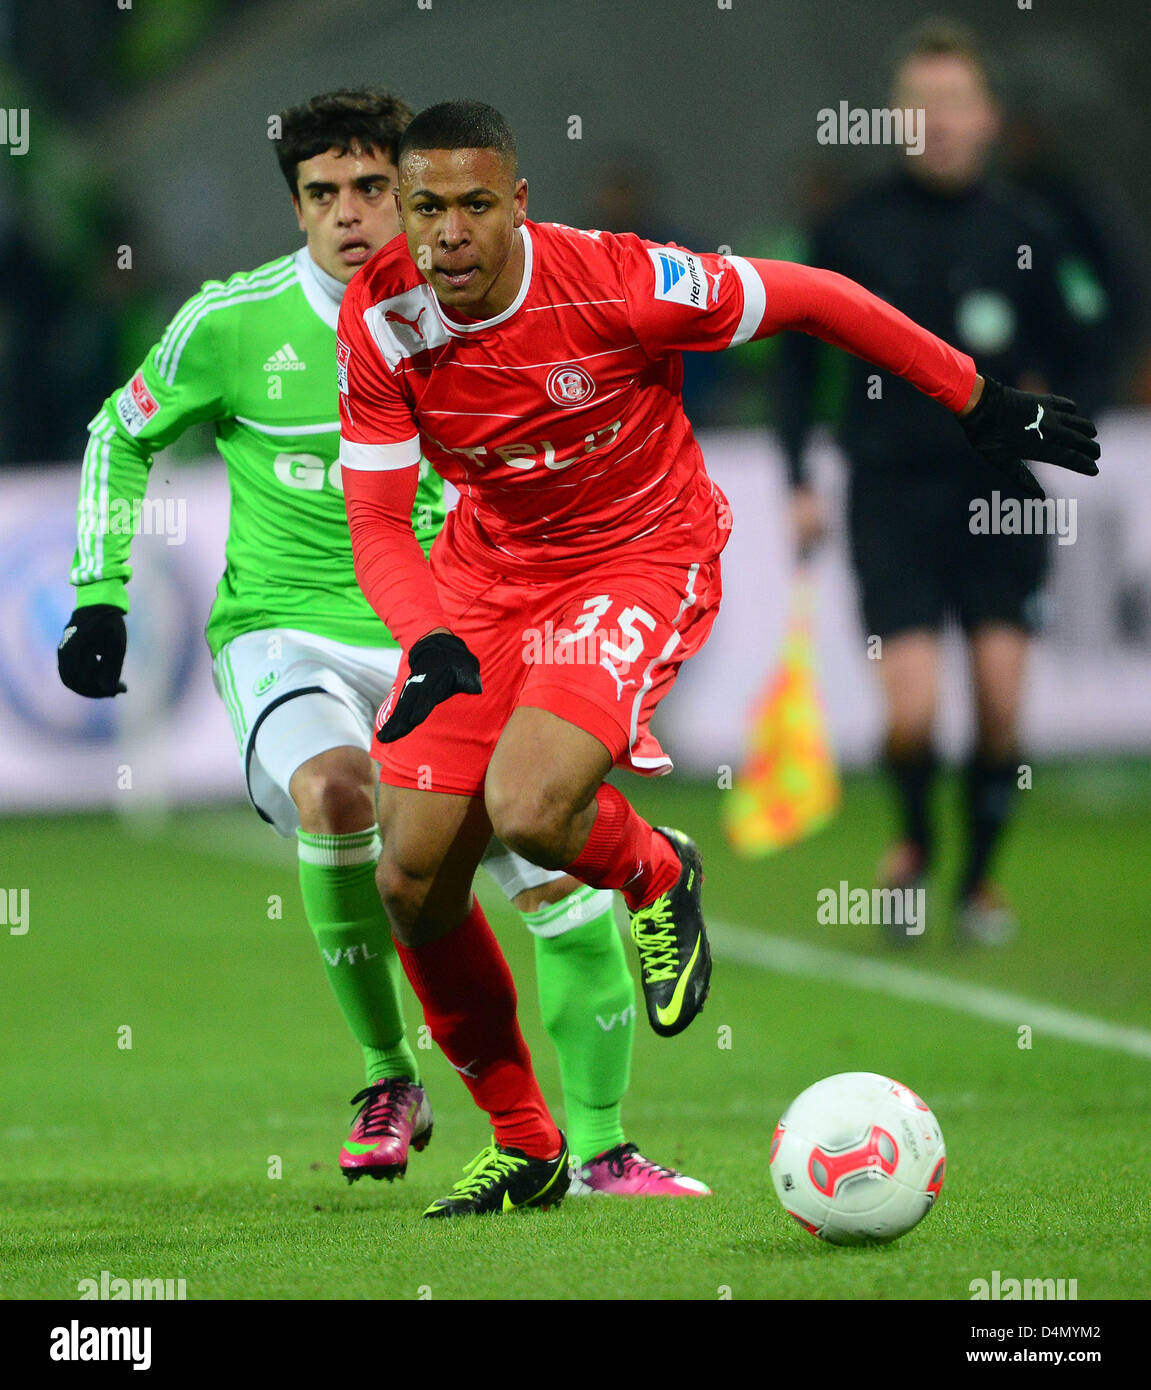 Wolfsburgs' Fagner and Duesseldorfs' Mathis Bolly vie for the ball during the match VfL Wolfsburg - Fortuna Duesseldorf in the Volkswagen-Arena in Wolfsburg, Germany, 15 March 2013. Photo: Peter Steffen  (ATTENTION: EMBARGO CONDITIONS! The DFL permits the further utilisation of up to 15 pictures only (no sequential pictures or video-similar series of pictures allowed) via the internet and online media during the match (including halftime), taken from inside the stadium and/or prior to the start of the match. The DFL permits the unrestricted transmission of digitised recordings during the match Stock Photo